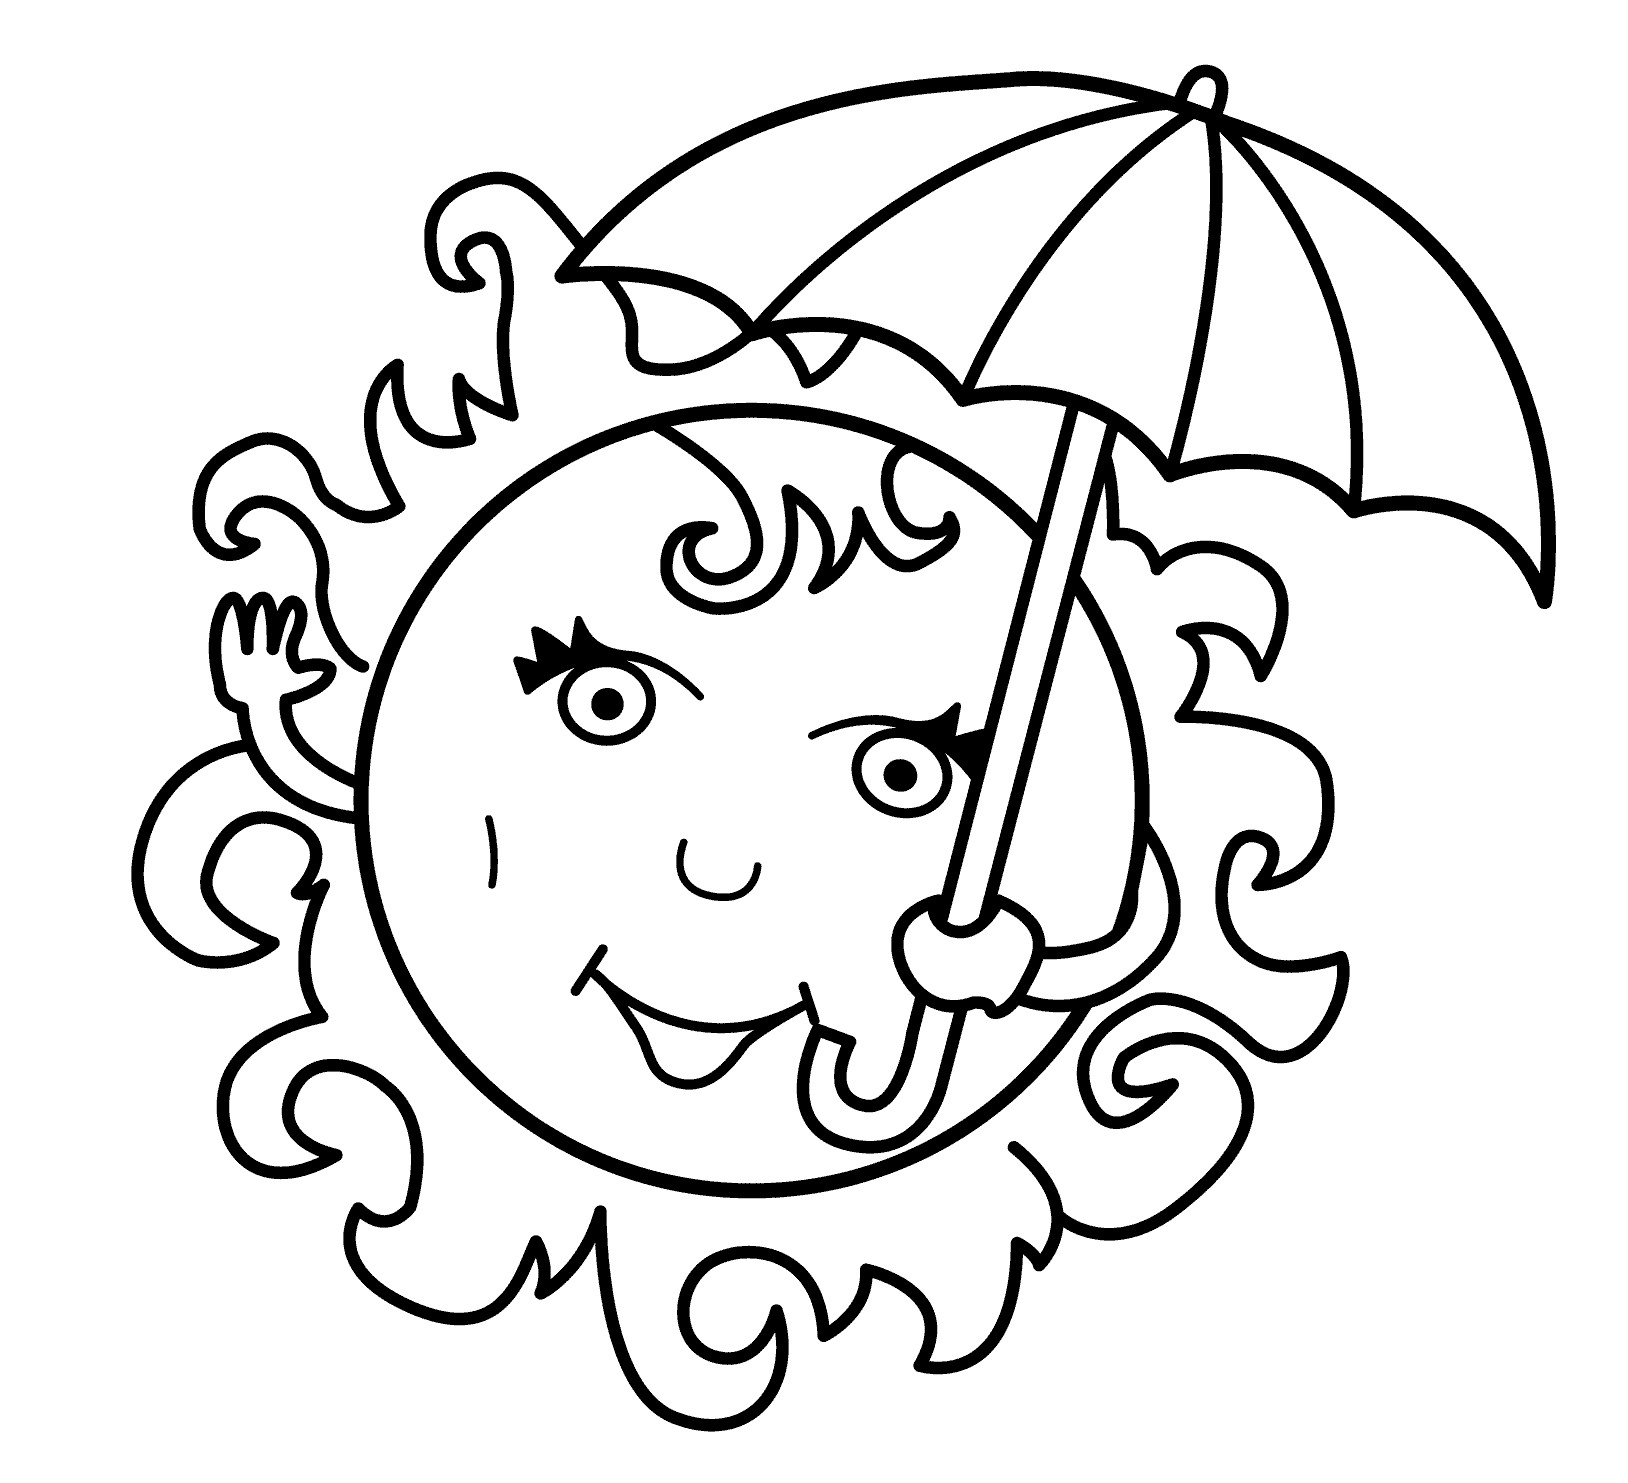 Summer Coloring Pages To Print
 Download Free Printable Summer Coloring Pages for Kids